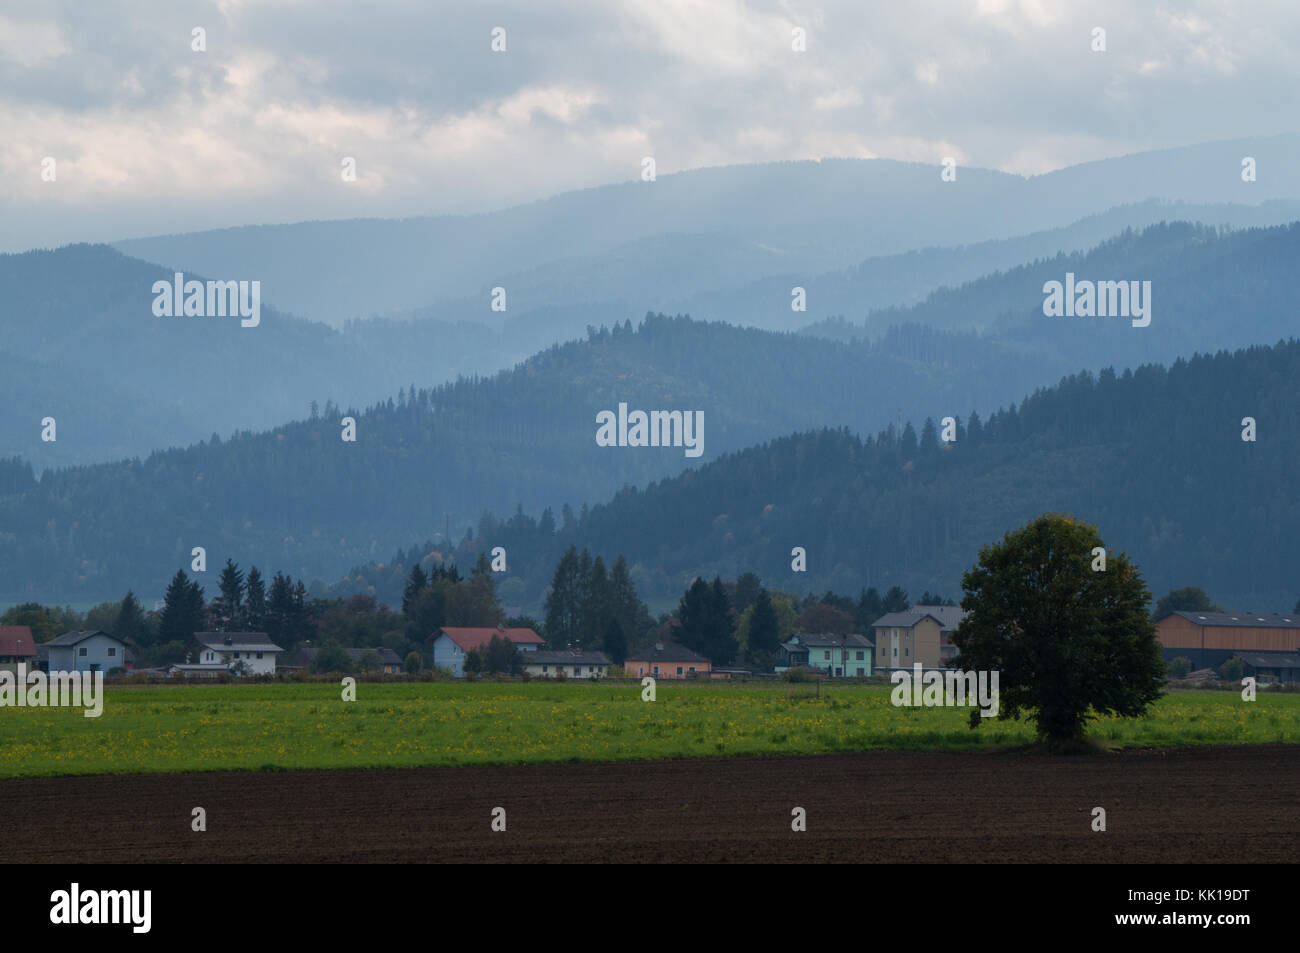 Arable land with hills and mountains in the background Stock Photo